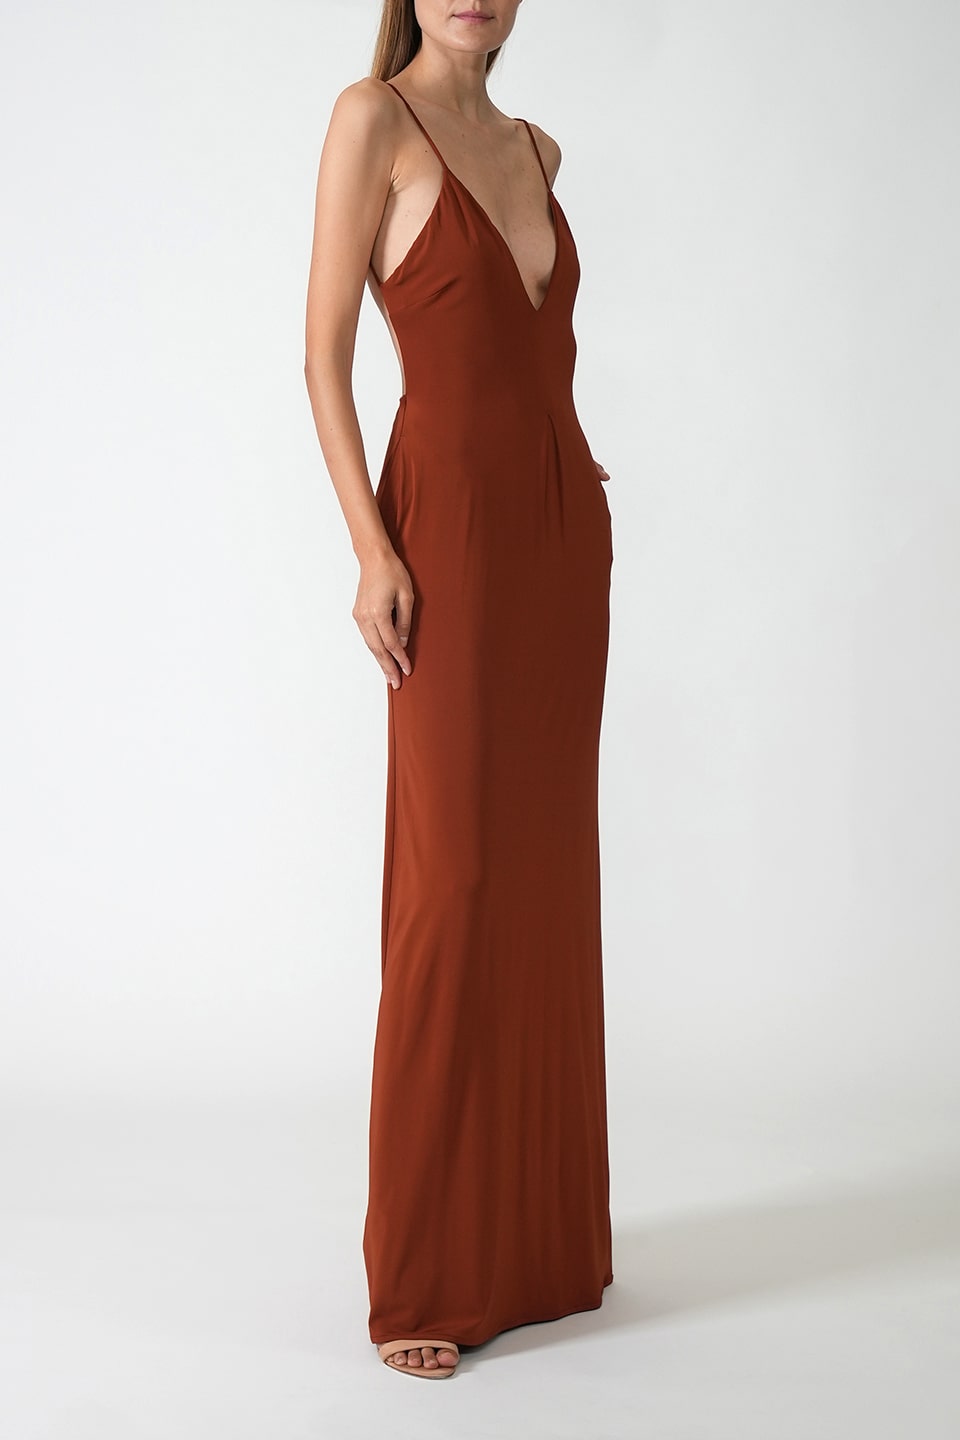 Thumbnail for Product gallery 3, Backless Long Dress Bronze